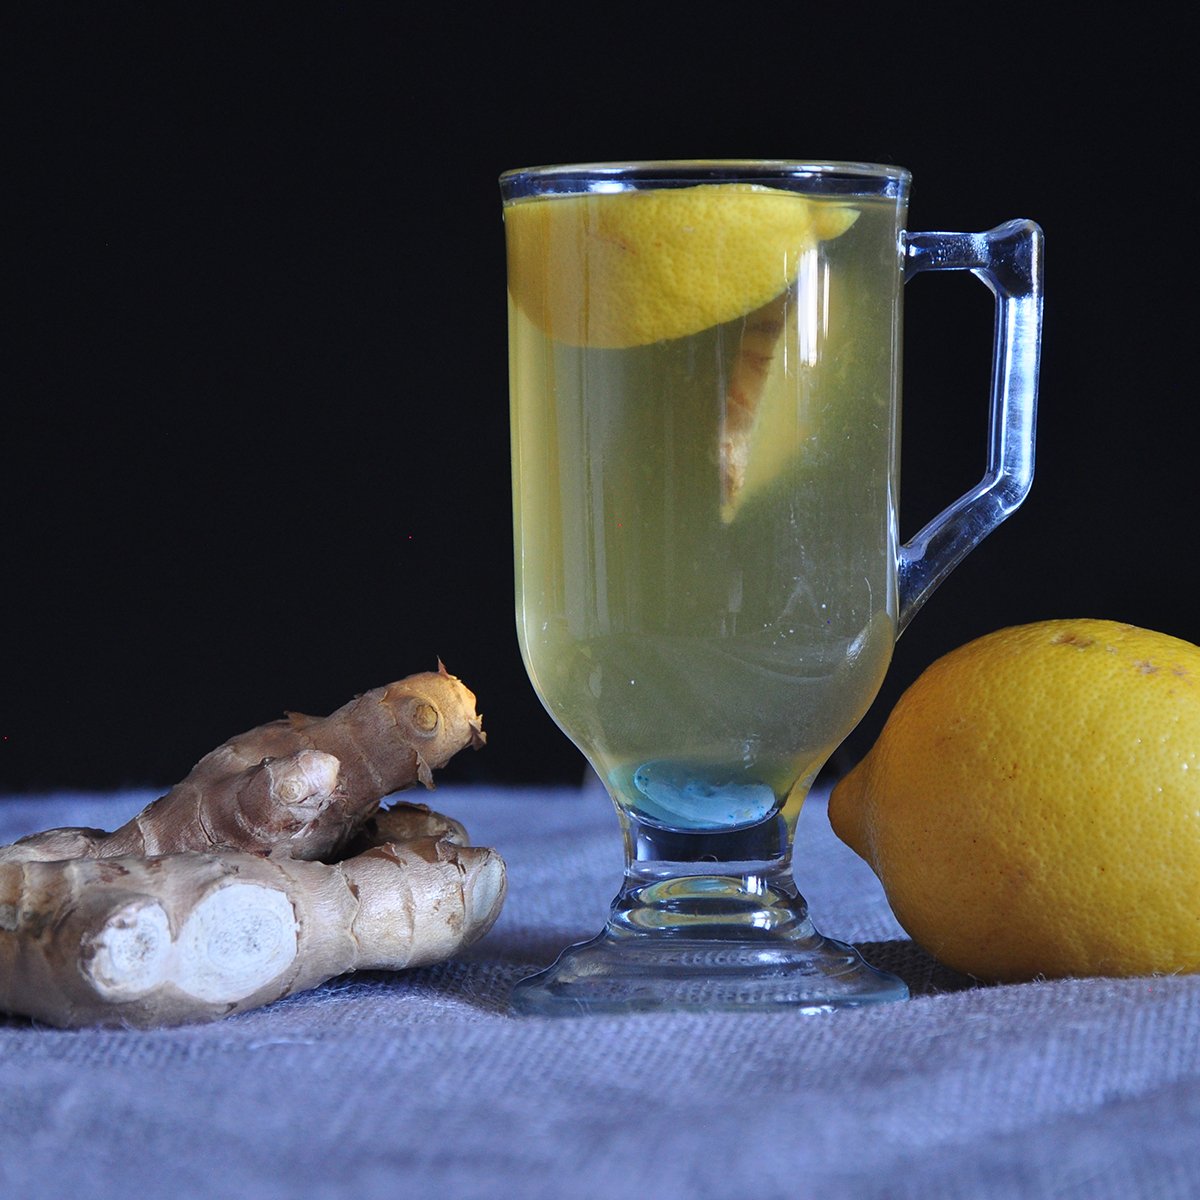 Hot toddy for a cold pictured with a lemon and ginger on a tablecloth covered counter